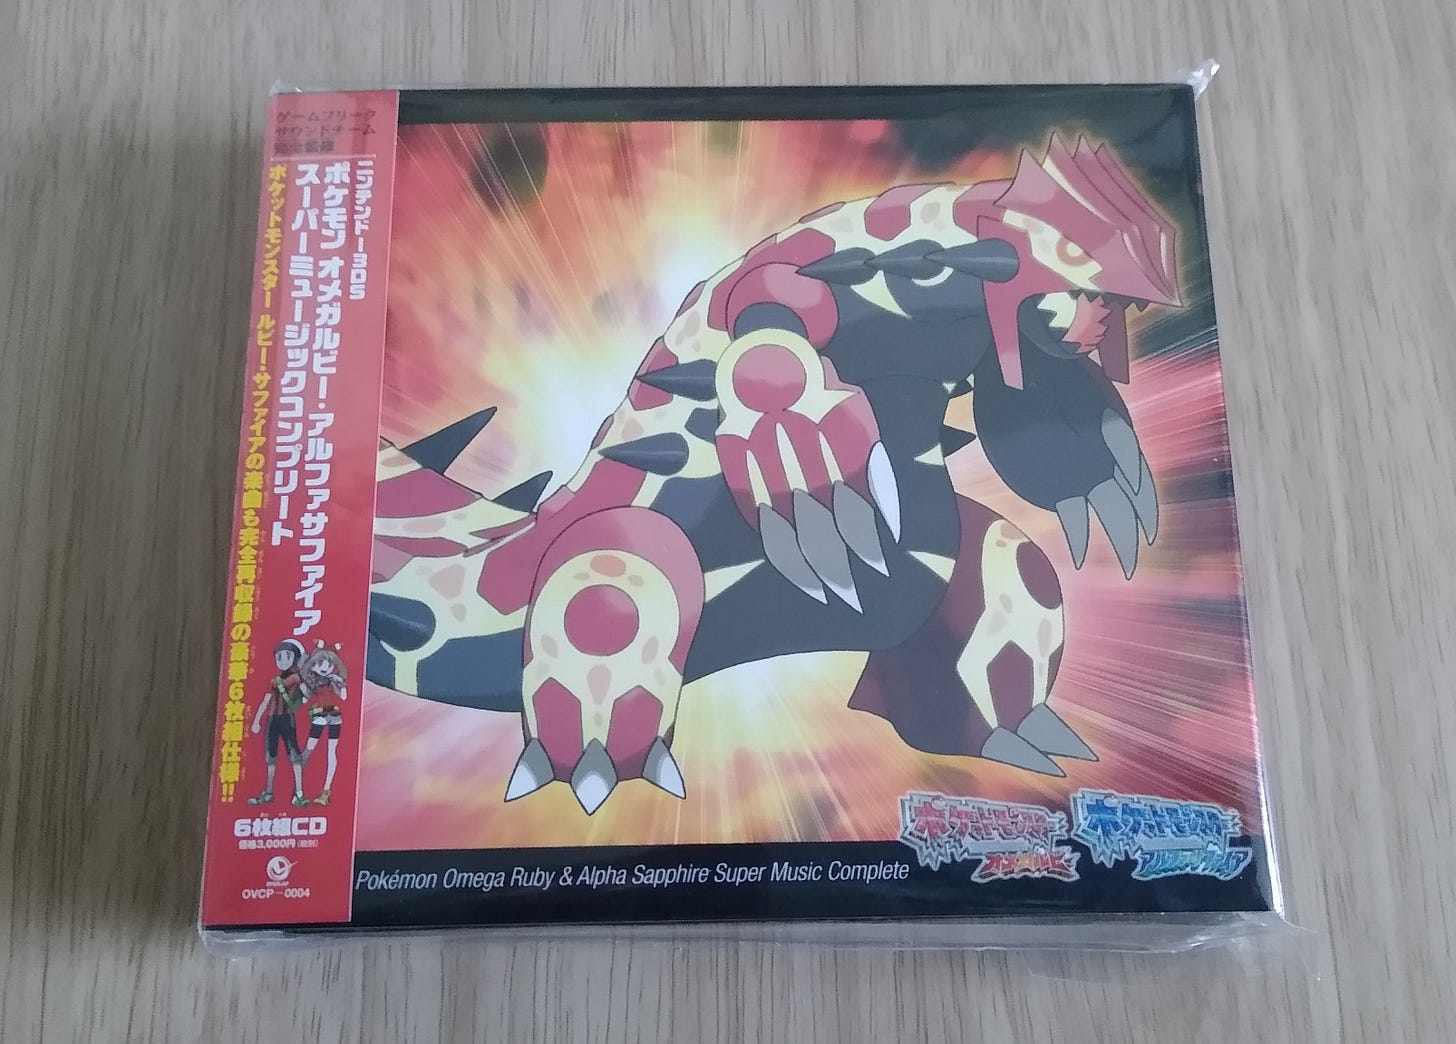 Pokémon Omega Ruby & Alpha Sapphire Super Music Complete was released in Japan on December 3rd, 2014